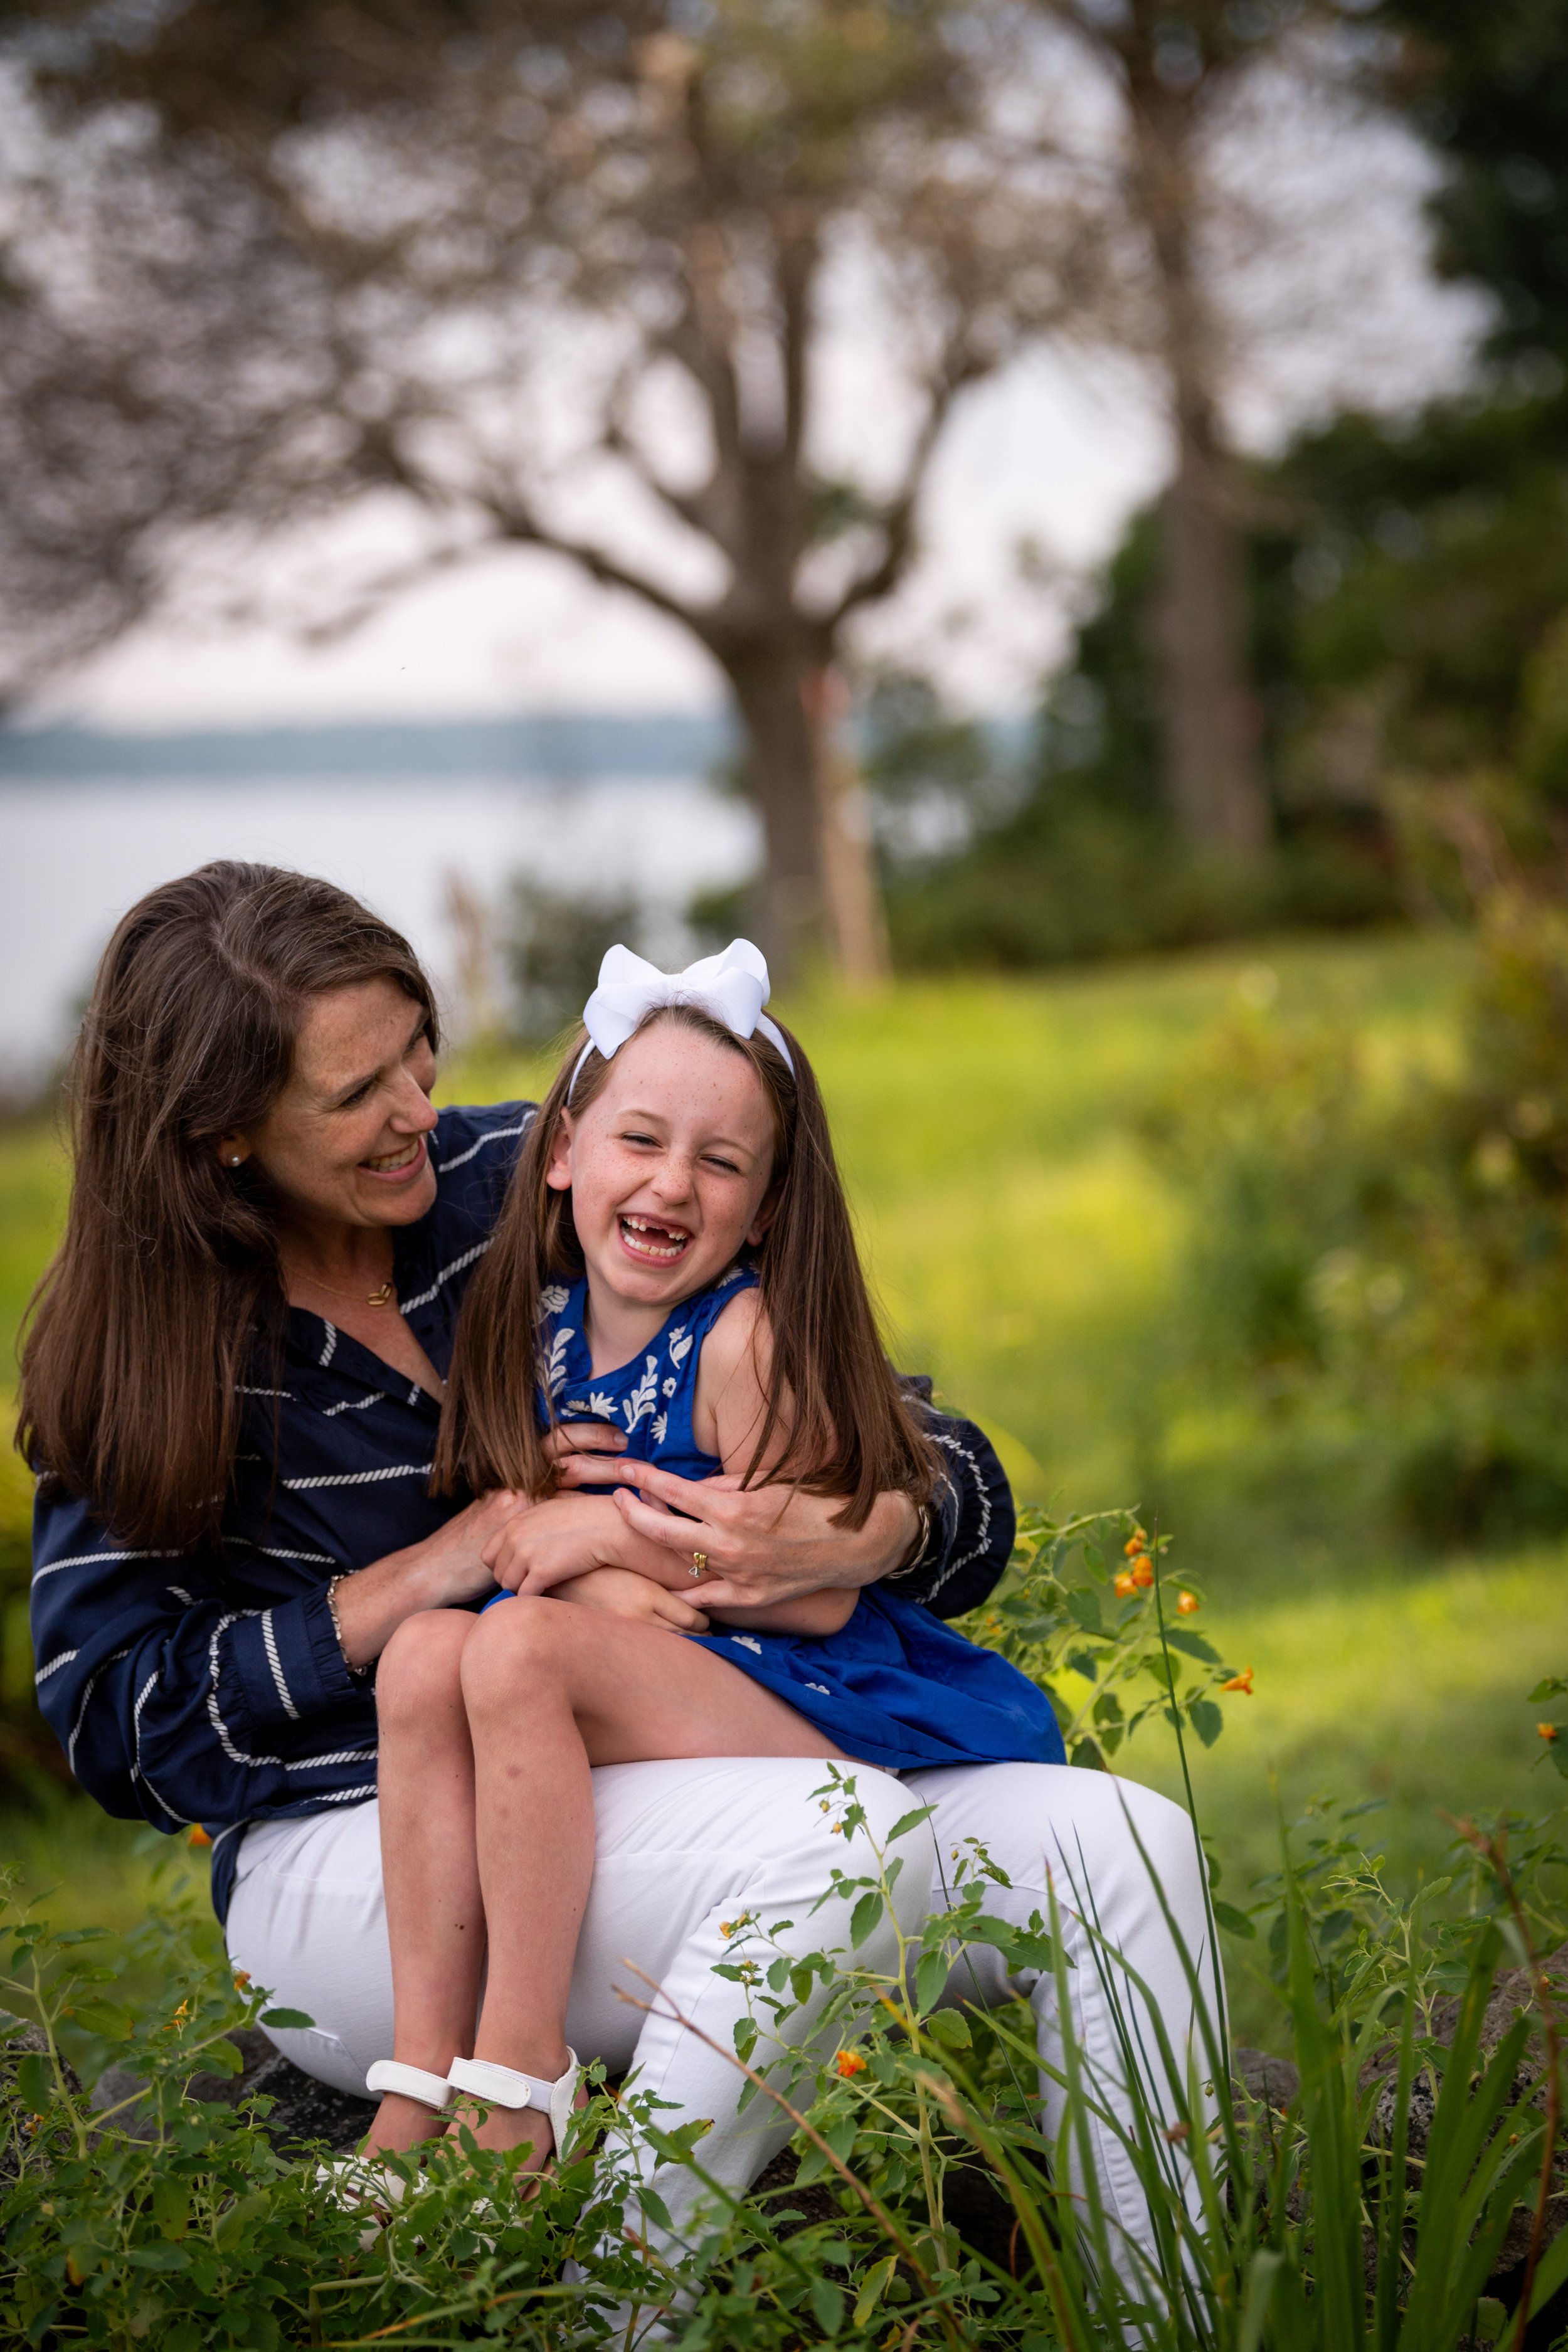 lindsay murphy photography | portland maine family photographer | chebeague island mother daughter candid photo.jpg